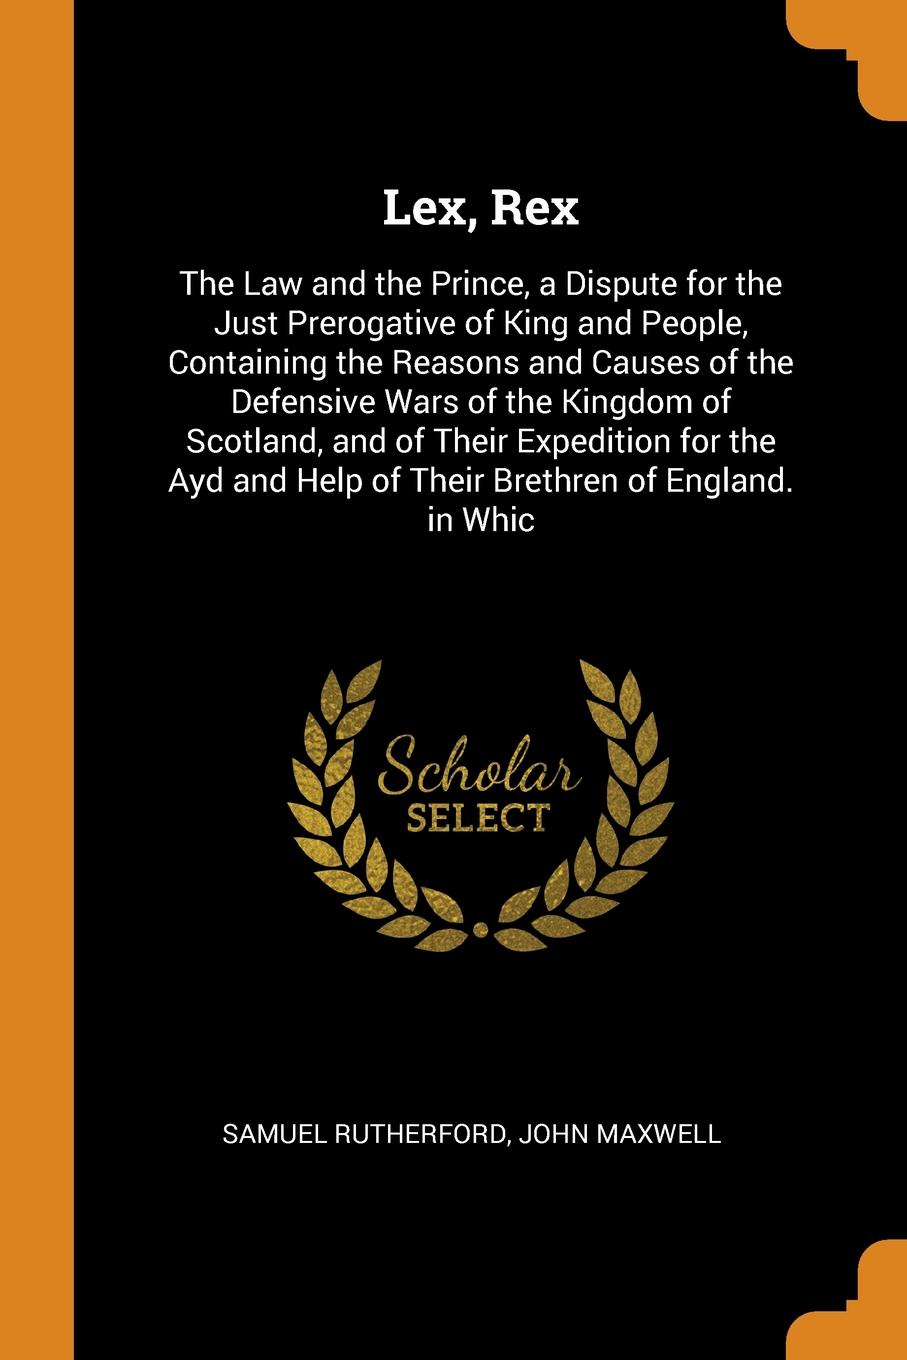 Lex, Rex. The Law and the Prince, a Dispute for the Just Prerogative of King and People, Containing the Reasons and Causes of the Defensive Wars of the Kingdom of Scotland, and of Their Expedition for the Ayd and Help of Their Brethren of England....